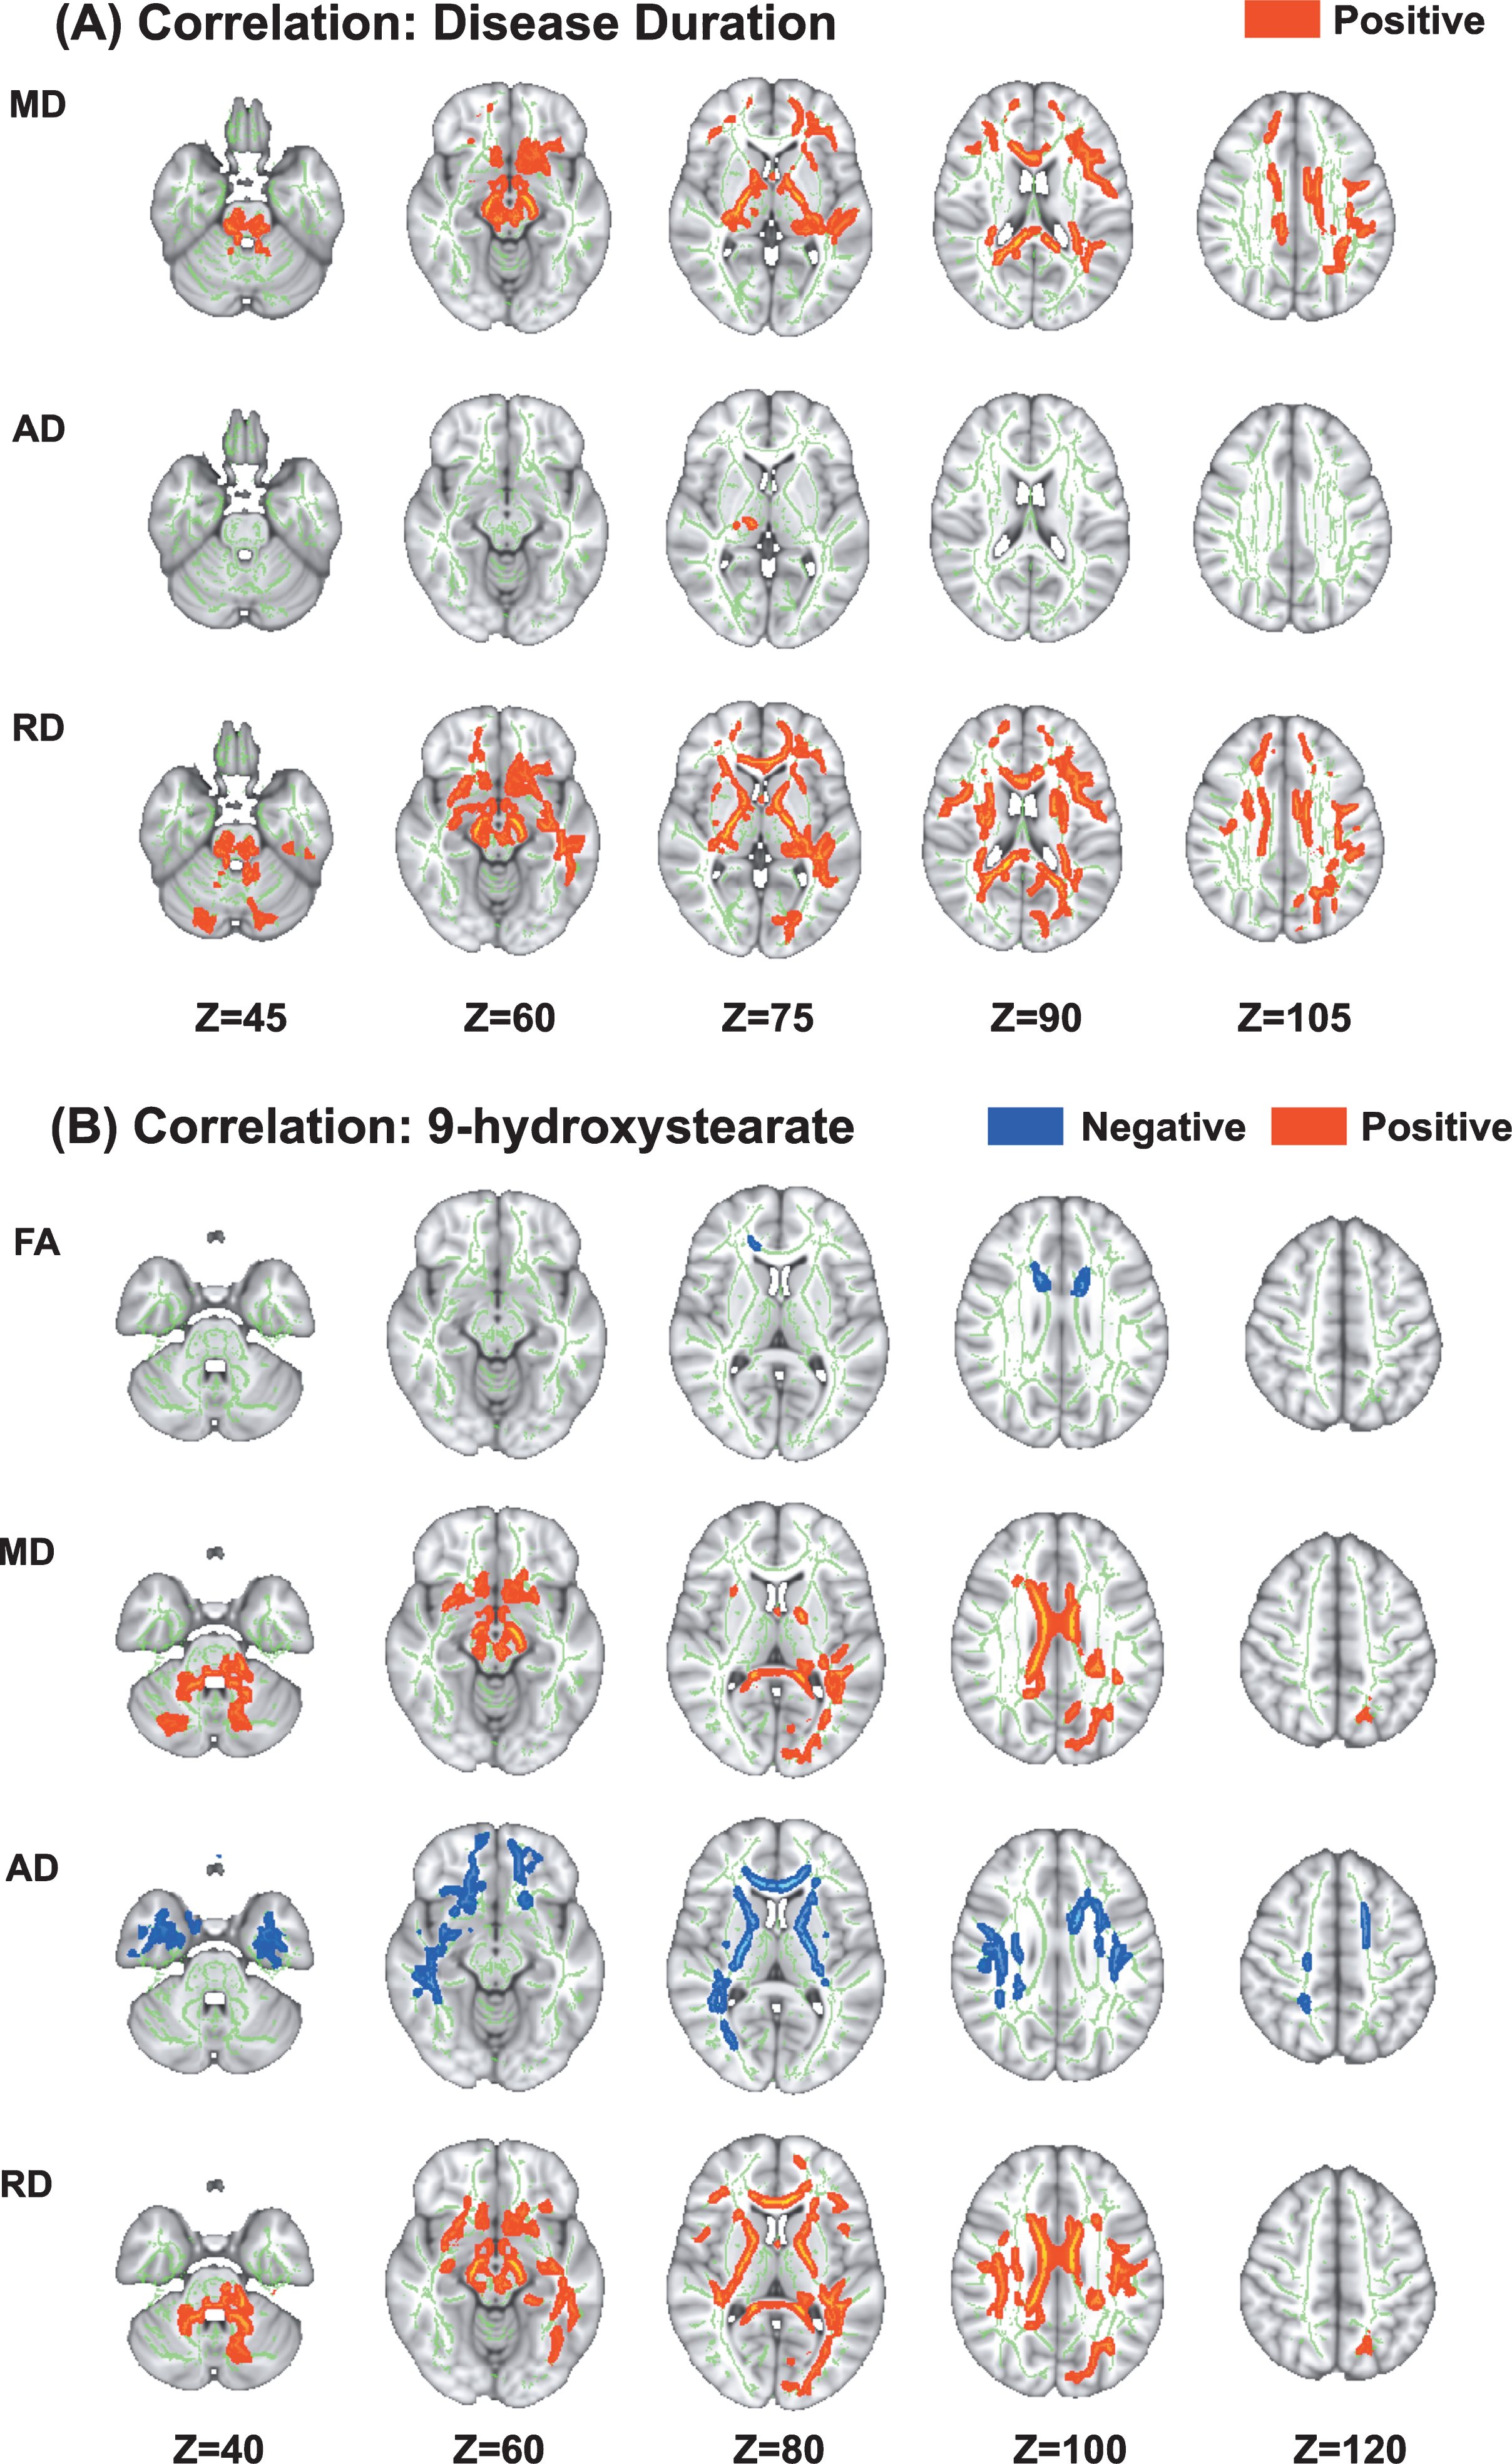 Correlations between diffusion tensor imaging measures and disease duration and 9-hydroxystearate levels in patients with Parkinson’s disease caused by PRKN mutations. Tract-based spatial statistics analyses in PRKN patients revealed a significant positive correlation between disease duration and MD, AD, and RD (A). Additionally, there was a significant negative correlation between the serum levels of 9-hydroxystearate and FA and AD, and a significant positive correlation between the serum levels of 9-hydroxystearate and MD and RD (B). AD, axial diffusivity; FA, fractional anisotropy; MD, mean diffusivity; RD, radial diffusivity.